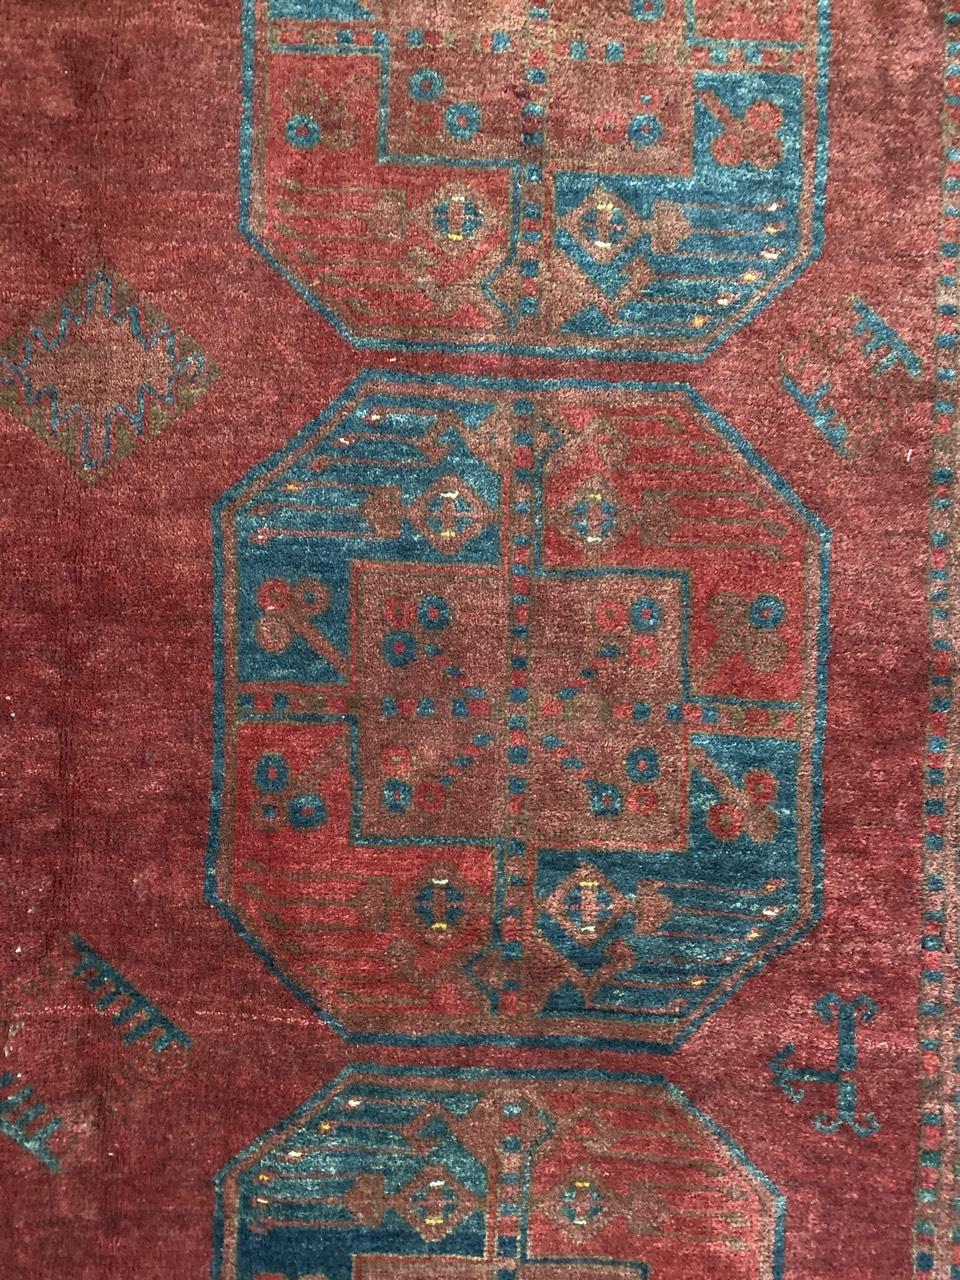 Hand-Knotted Beautiful Antique Afghan Rug